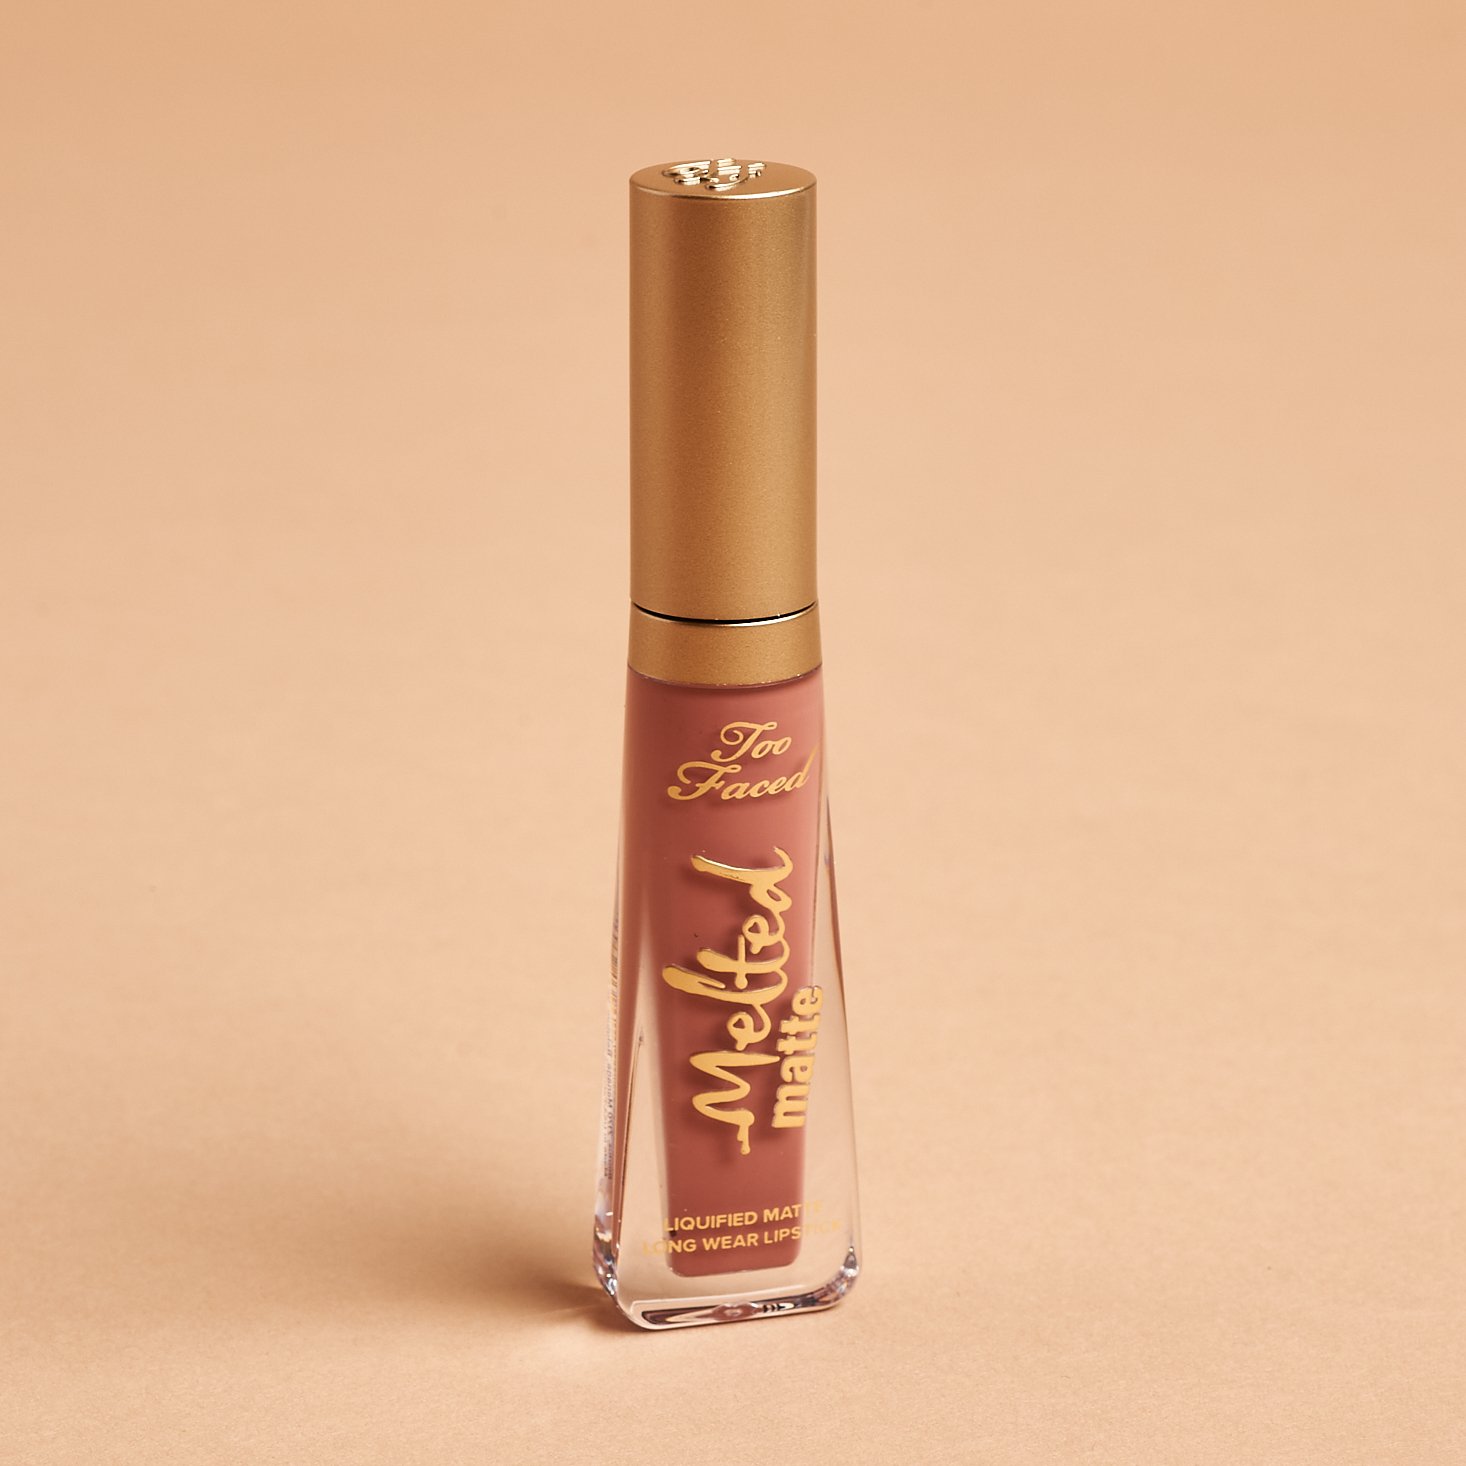 Sephora Favorites Give Me More Lip September 2020 - Too faced tube